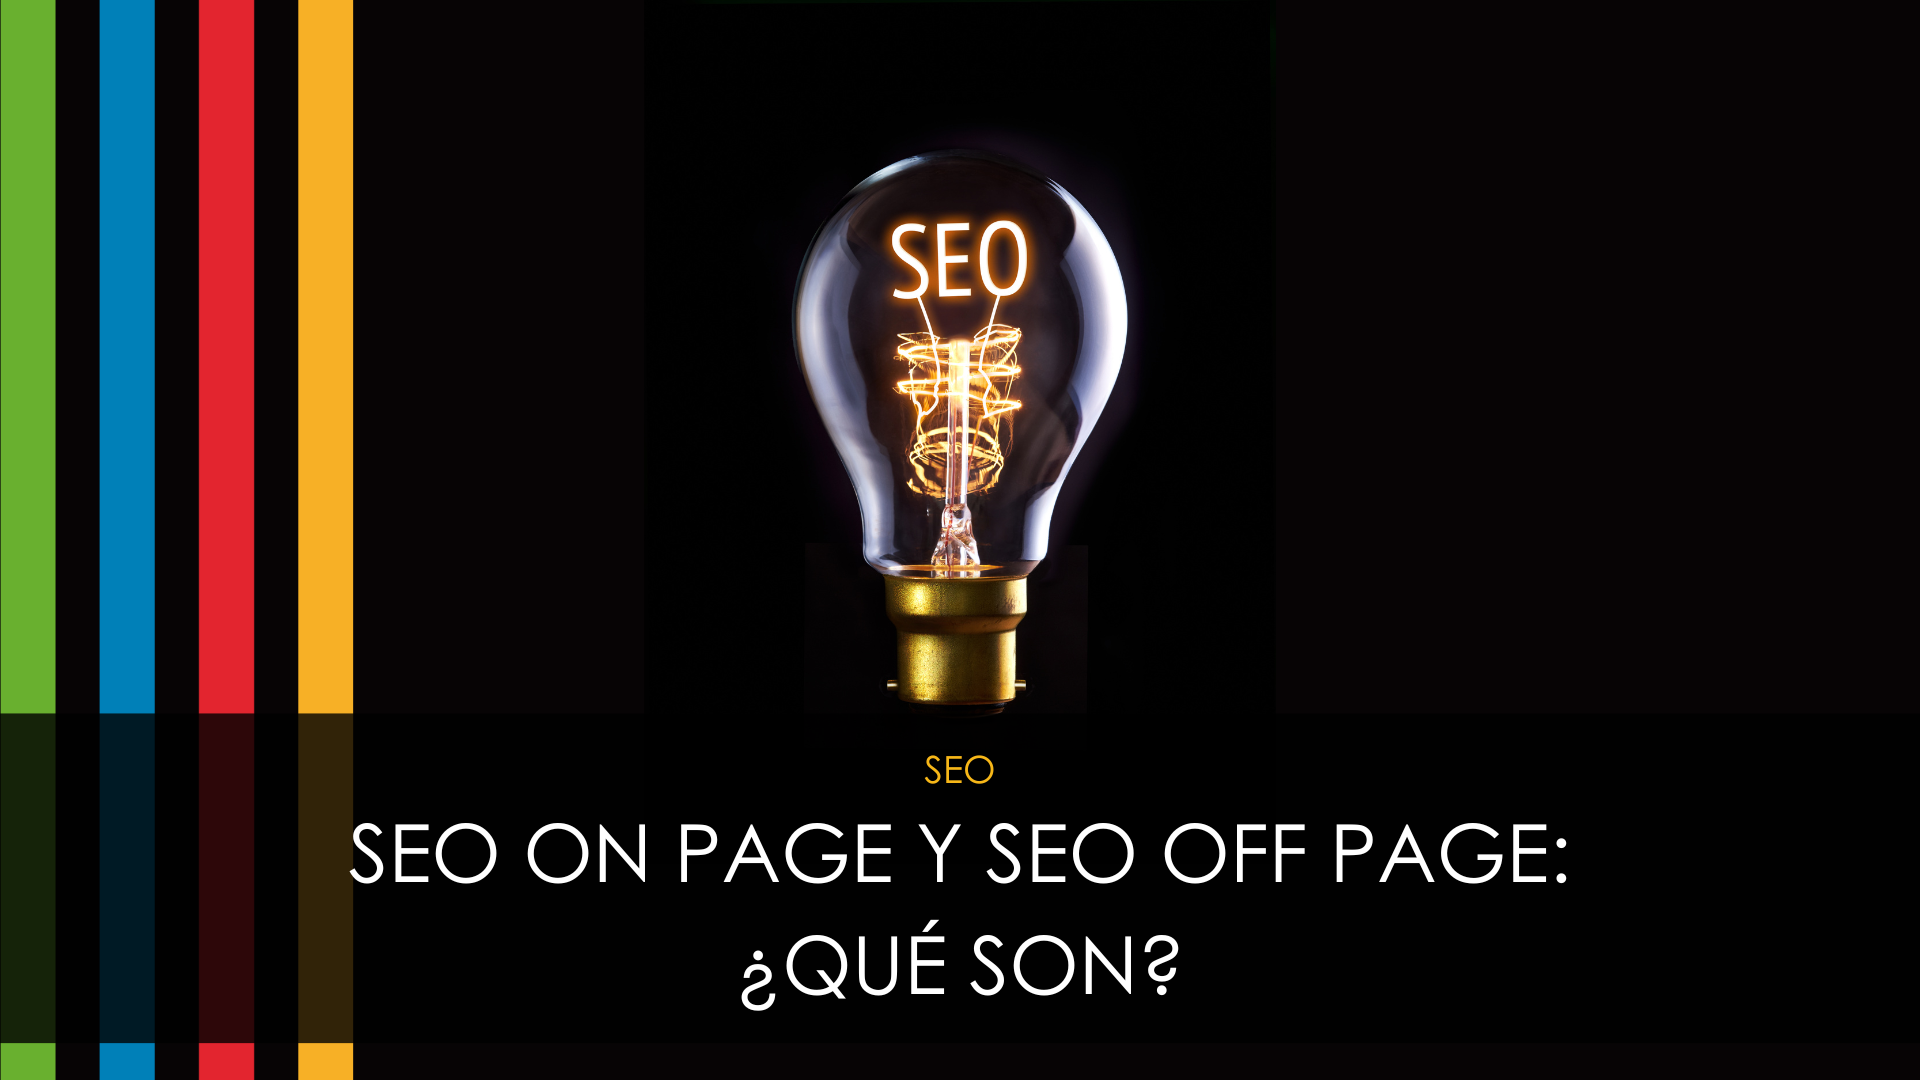 SEO on page y seo off page